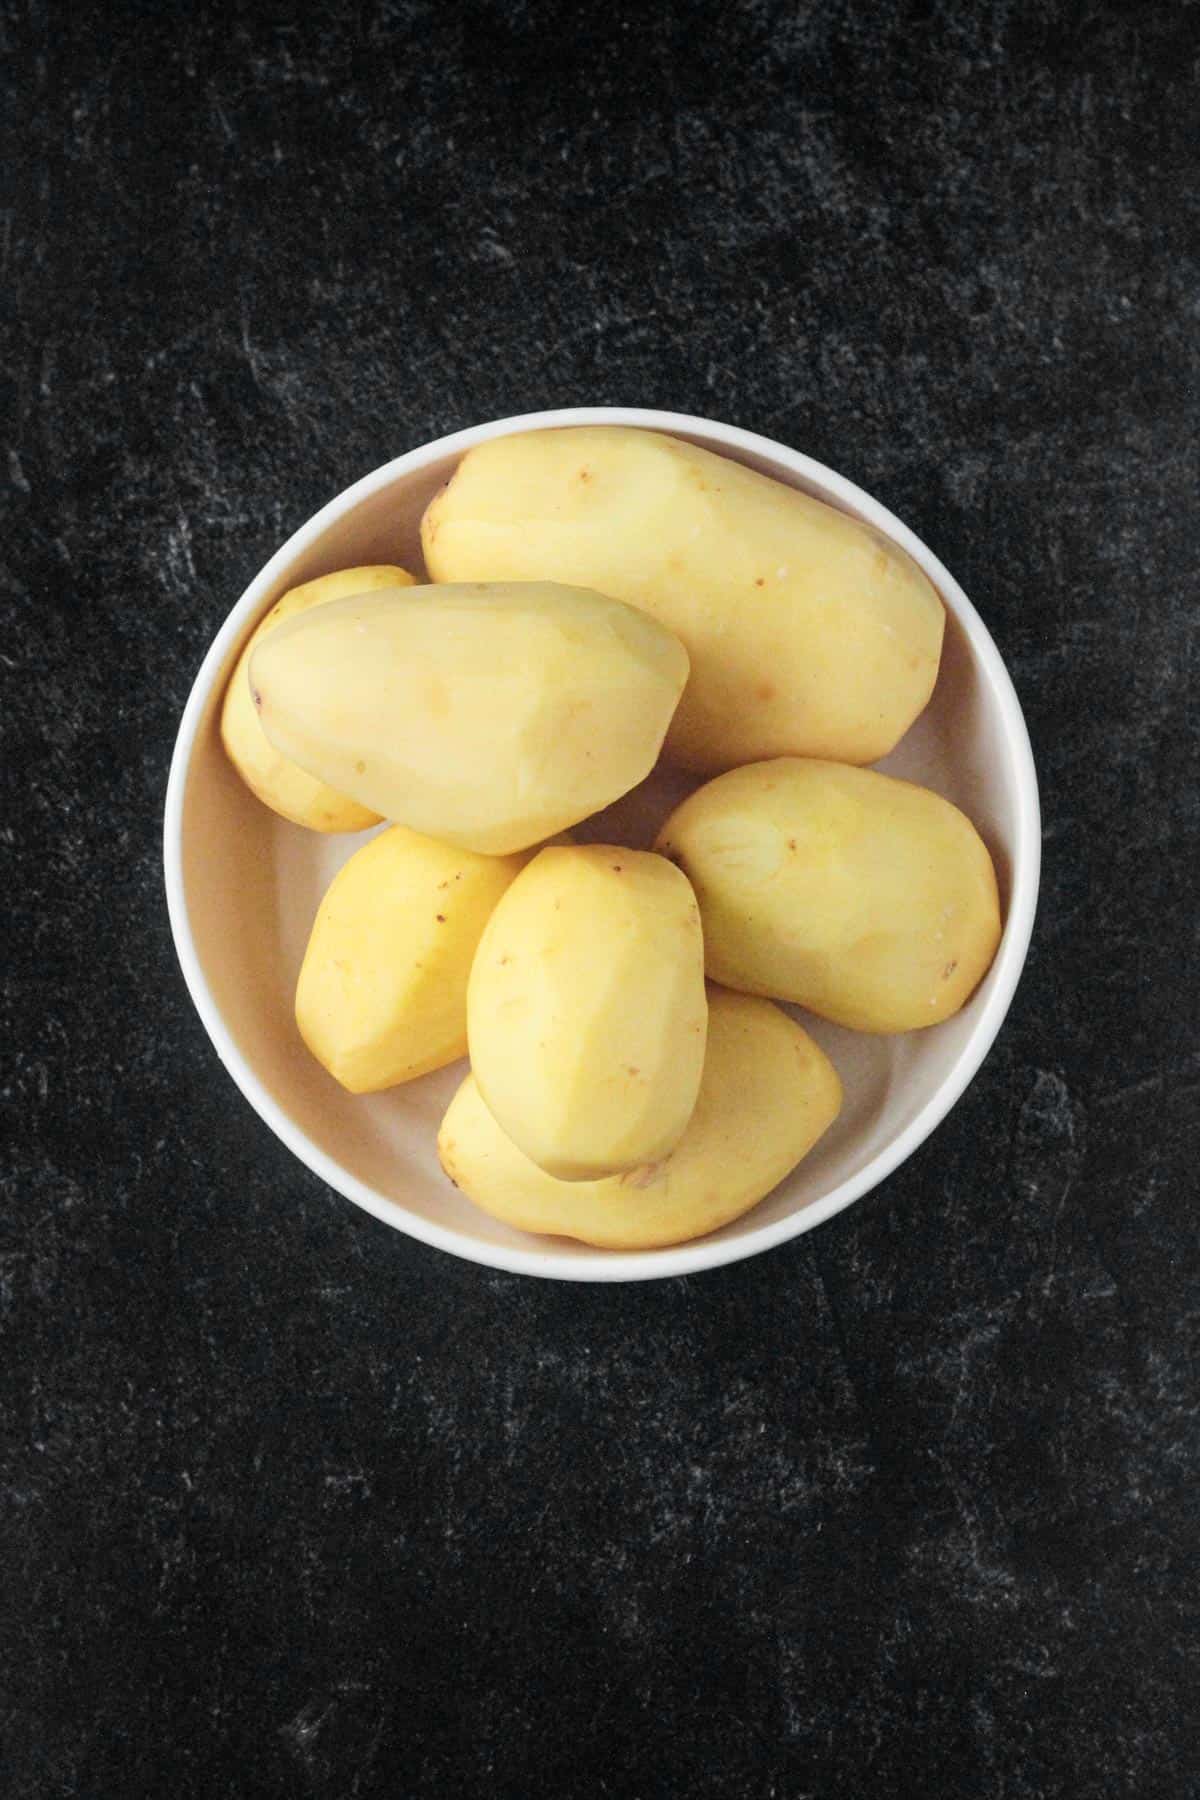 Peeled whole potatoes in a bowl.